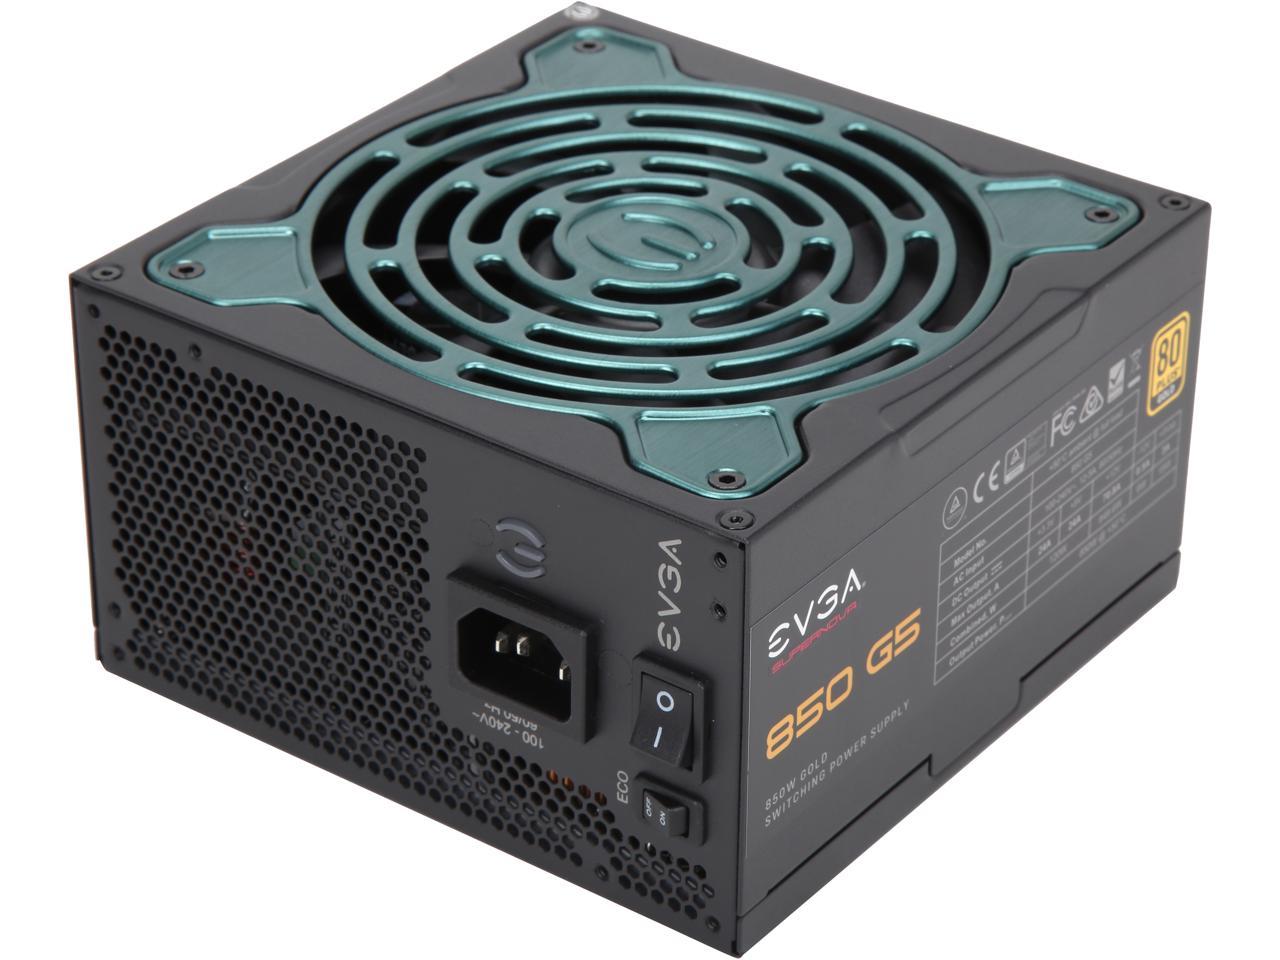 EVGA Supernova 850 G3 Power Supply 220-G3-0850-X1 Compact 150mm Size 80 Plus Gold 850W 10 Year Warranty Includes Power ON Self Tester Fully Modular Eco Mode with New HDB Fan 